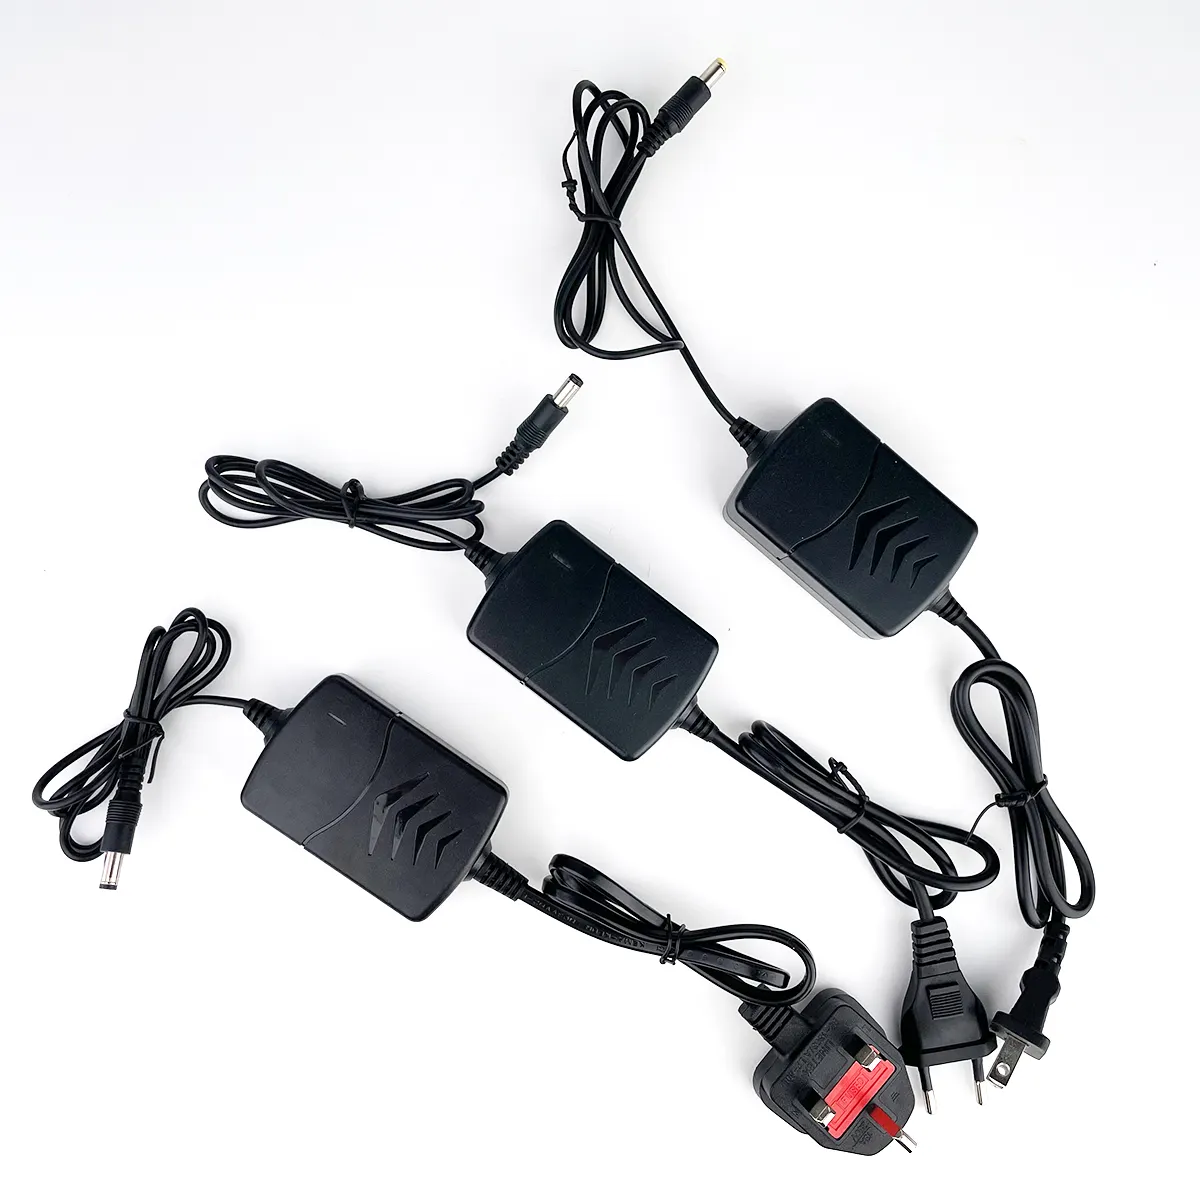 Wholesale Dc Eu UK US 12v power supply 12v/24v 1a 2a 3a 4a 5a ac/dc led dimmable power supply Adapter